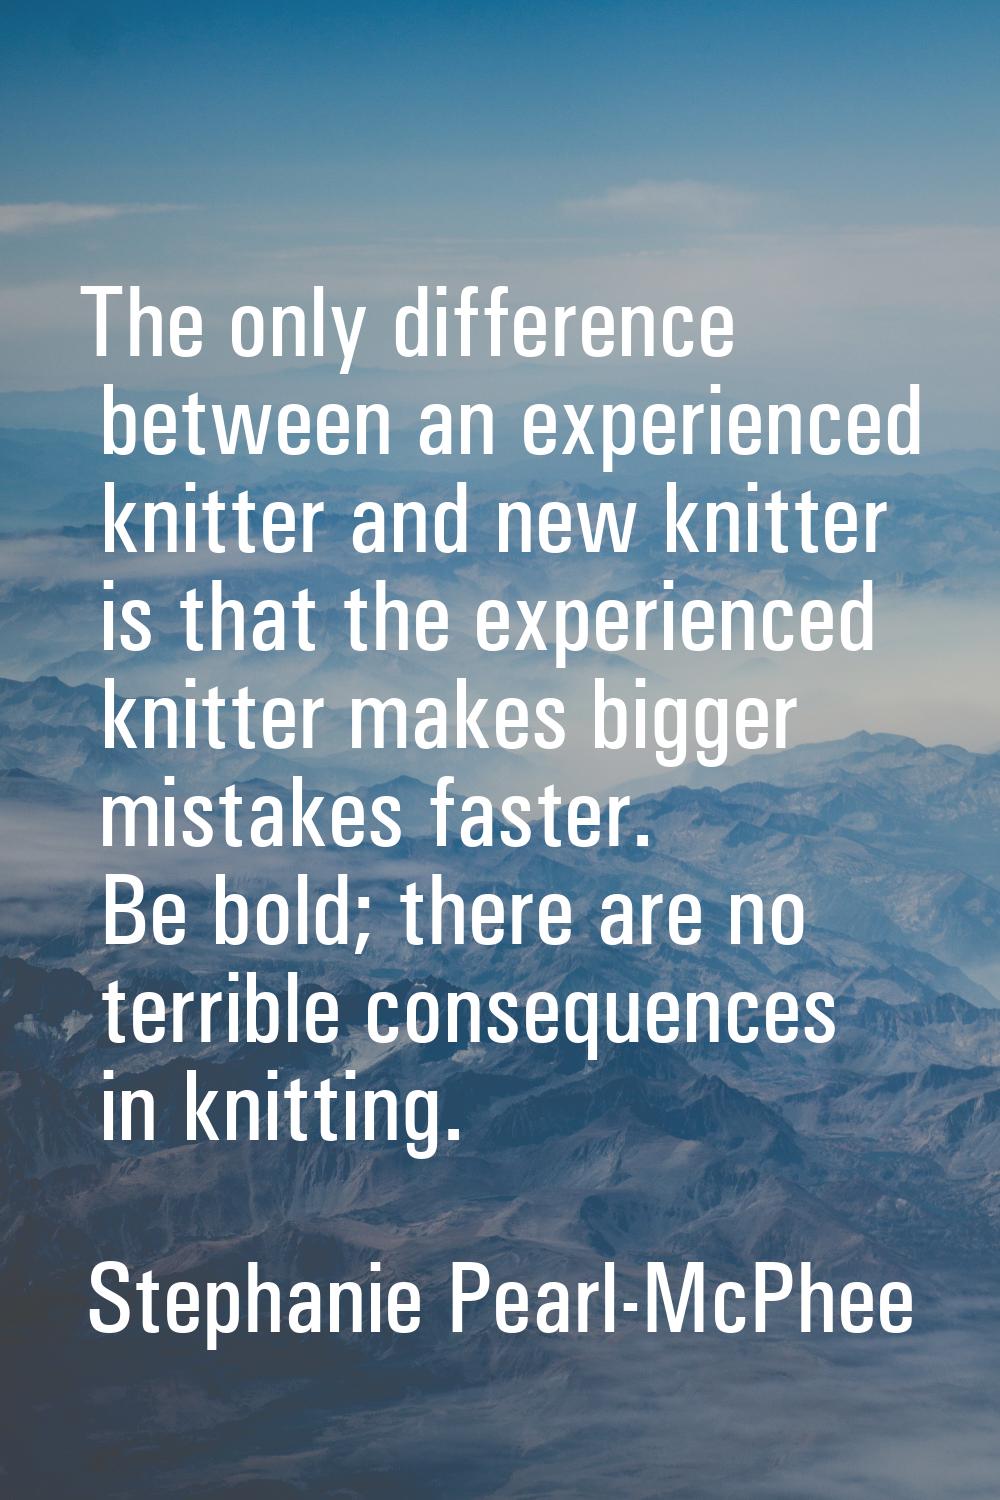 The only difference between an experienced knitter and new knitter is that the experienced knitter 